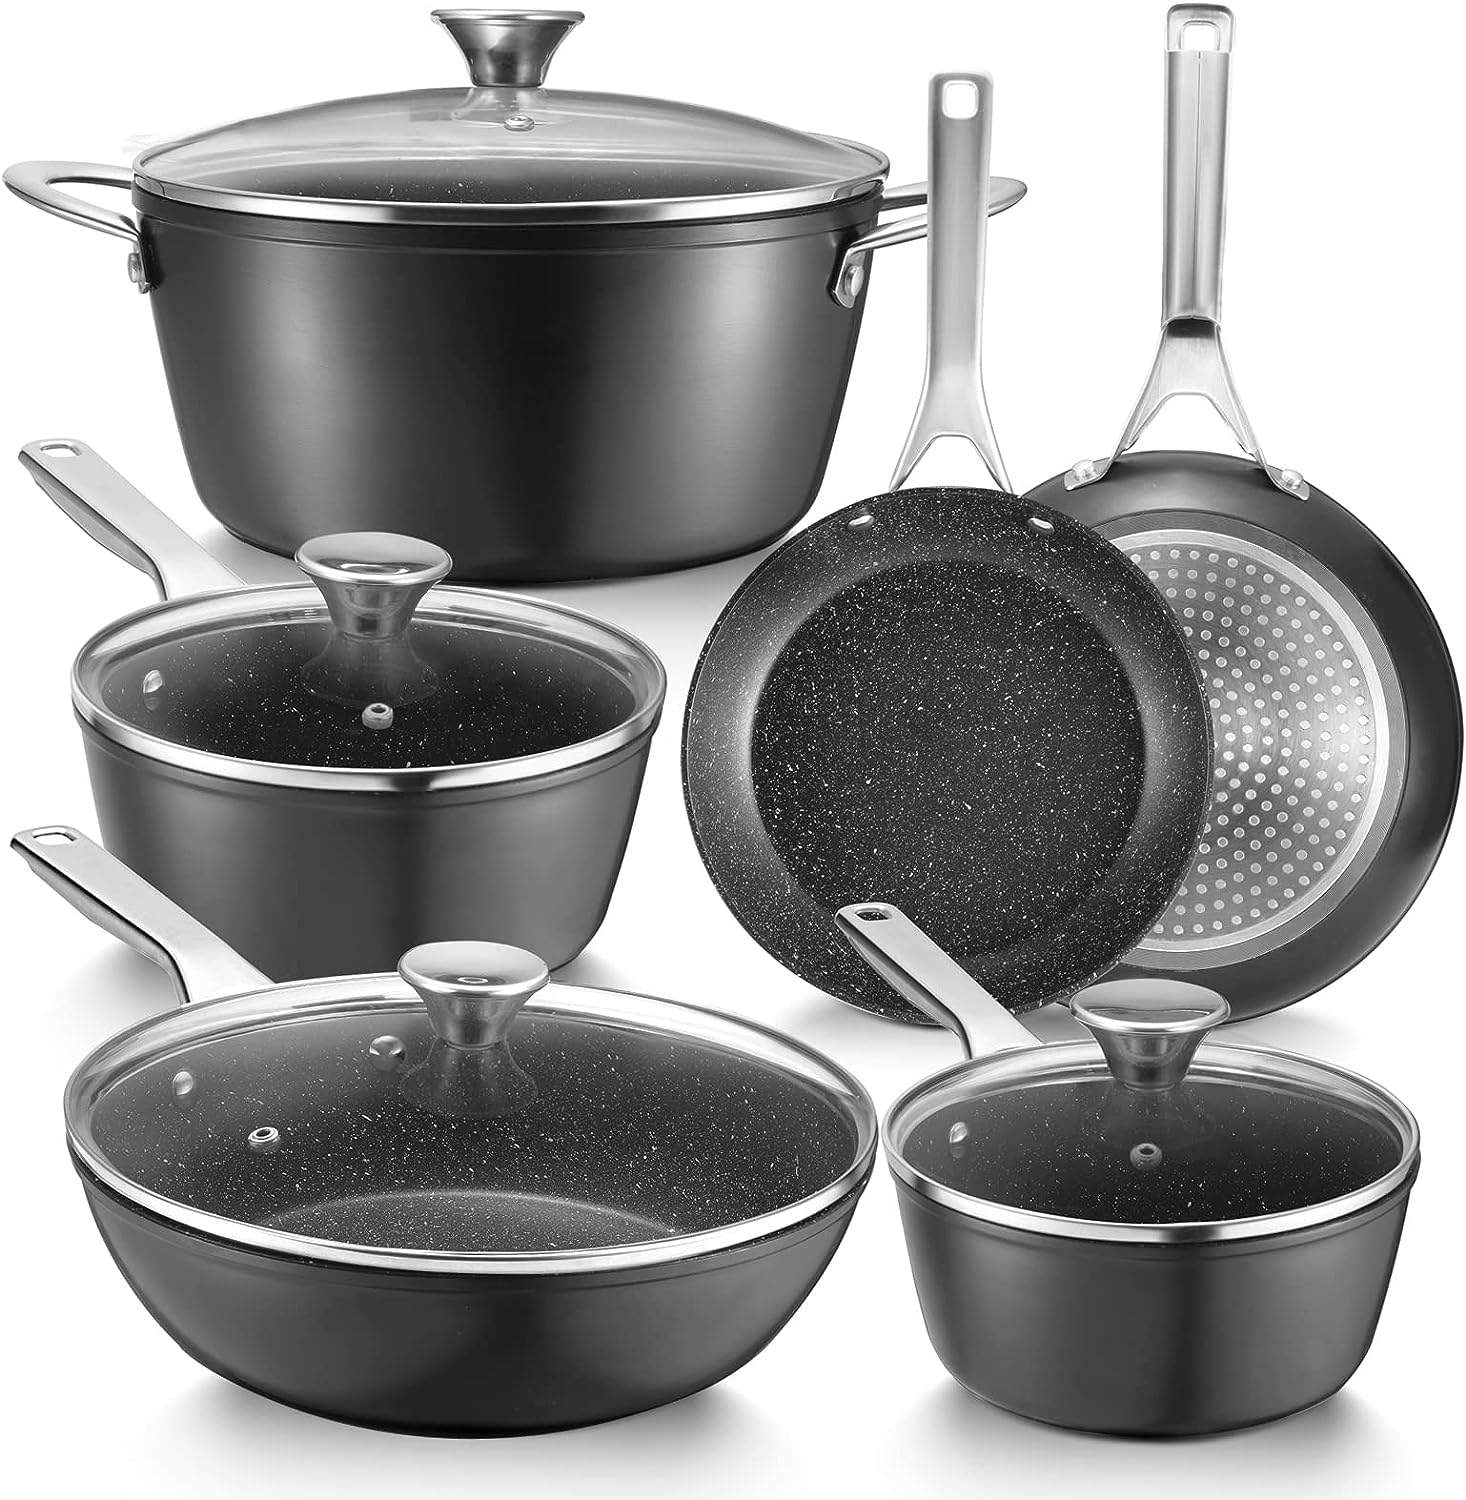 Induction Cookware Set, Fadware Pots and Pans Set Nonstick, Dishwasher Safe Pan Sets for Cooking Nonstick, Kitchen Utensils Set w/Frying Pans, Saucepans  Stockpot, Kitchen Essentials for New Home